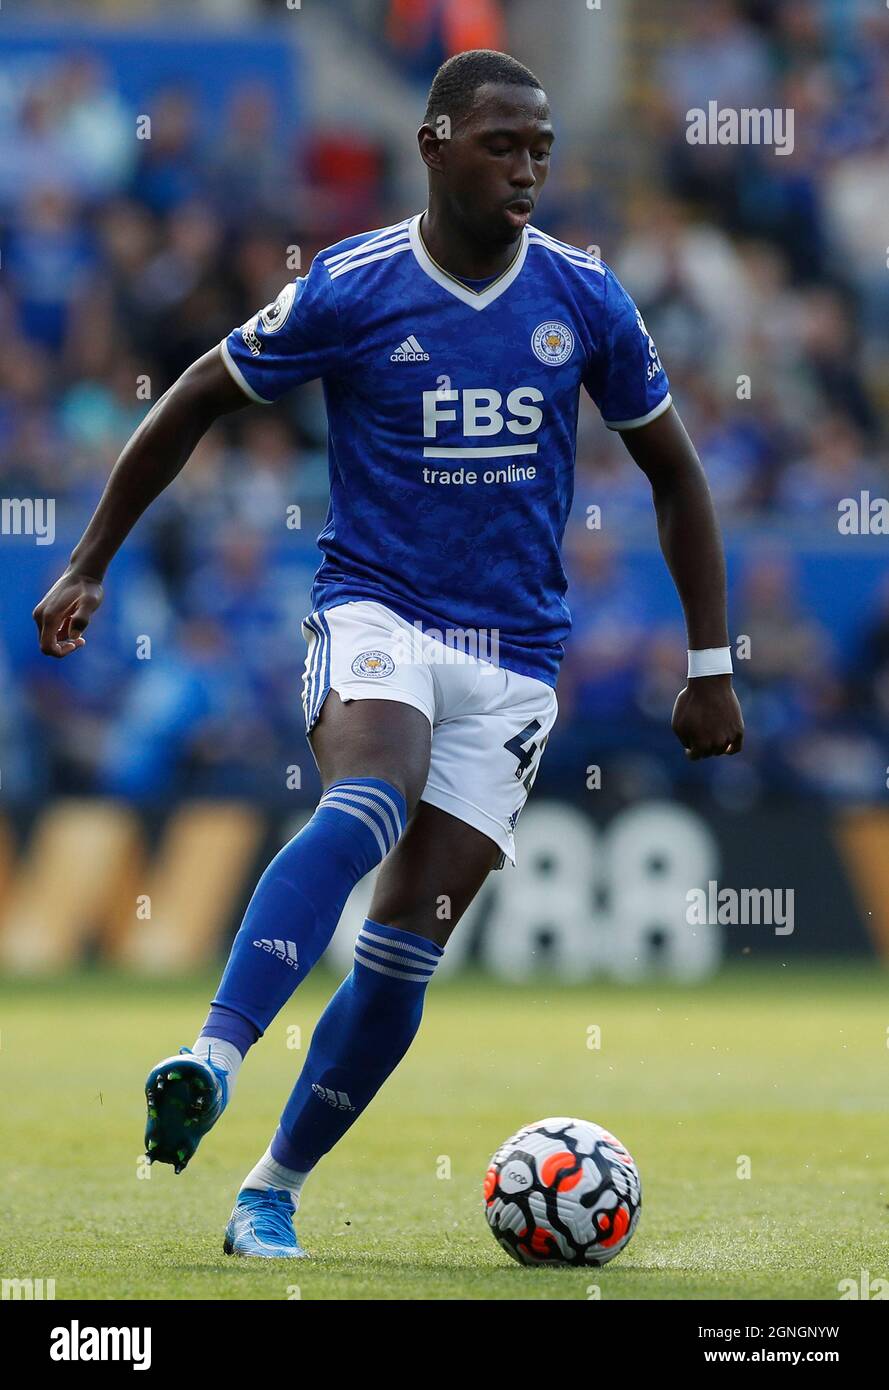 Leicester, England, 25th September 2021.  Boubakary Soumare of Leicester City during the Premier League match at the King Power Stadium, Leicester. Picture credit should read: Darren Staples / Sportimage Stock Photo